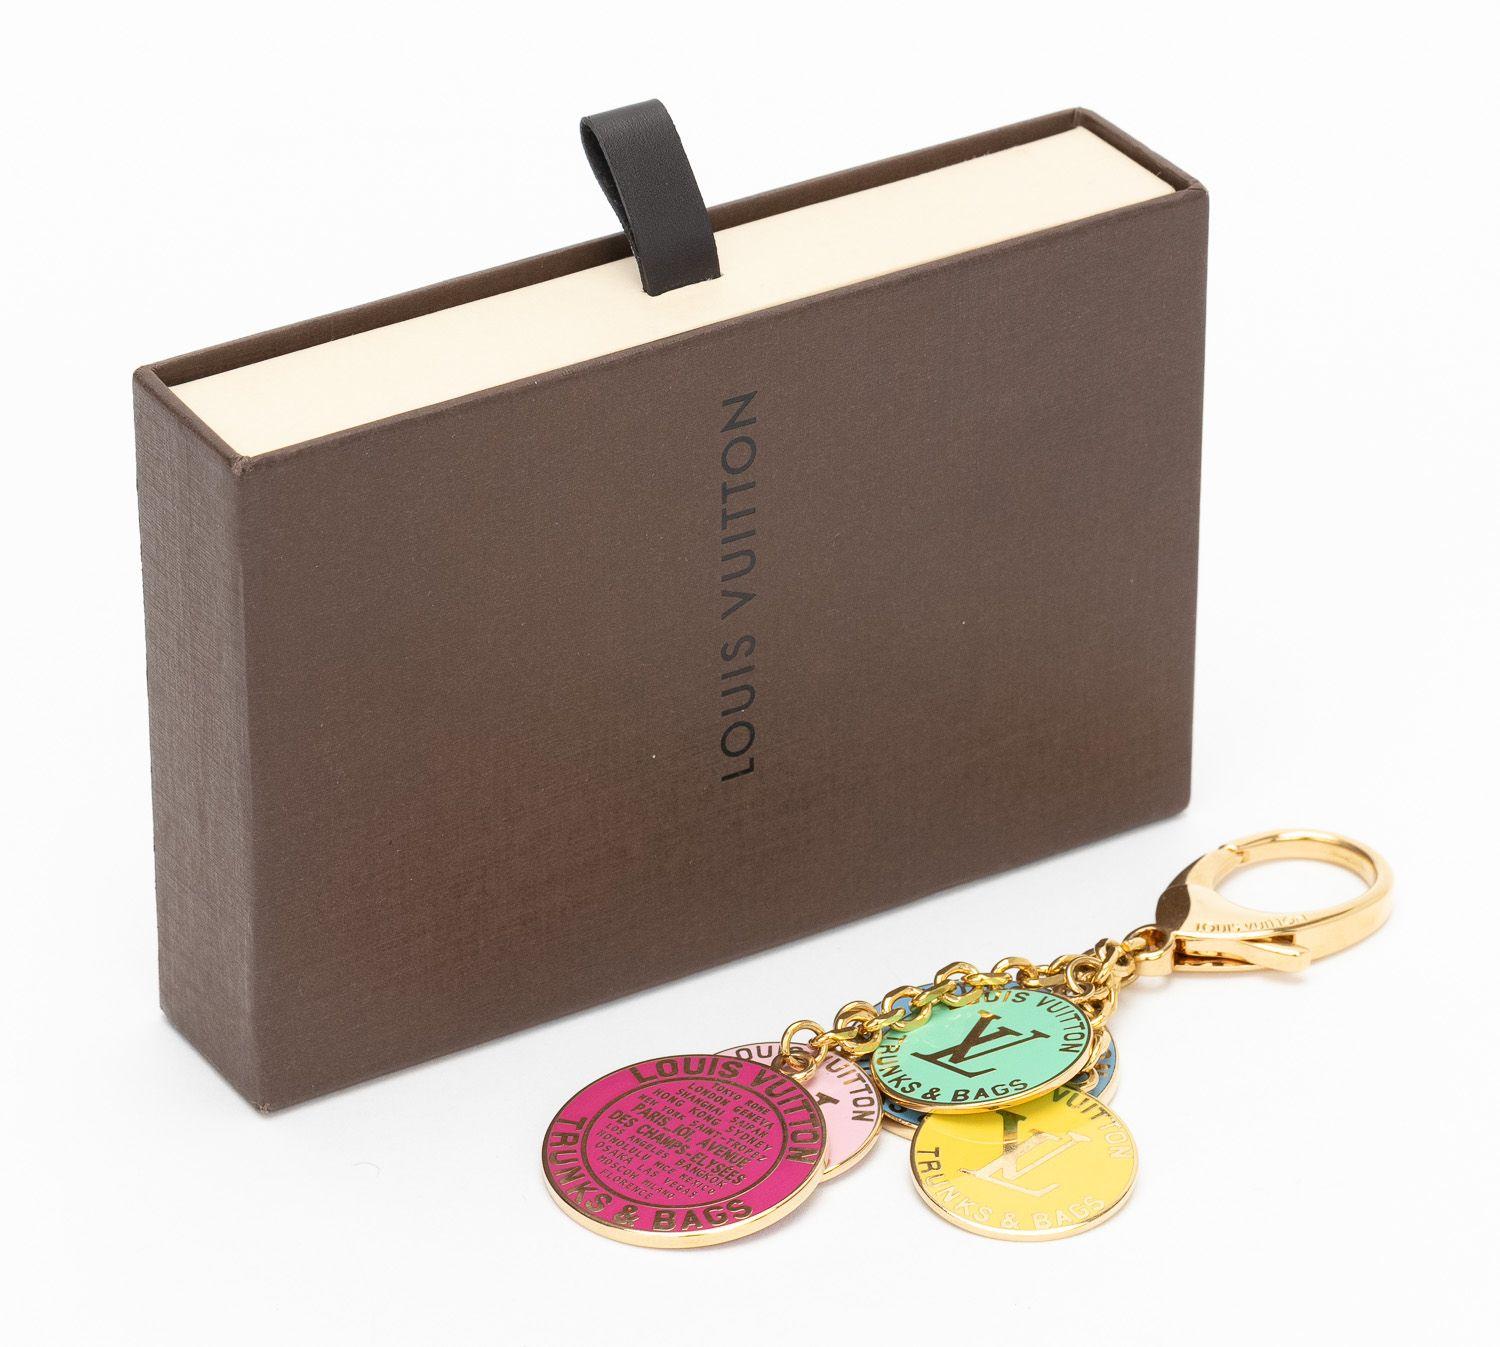 Louis Vuitton bag charm /keychain with enamel pastel coins. Come with original dust cover and box.